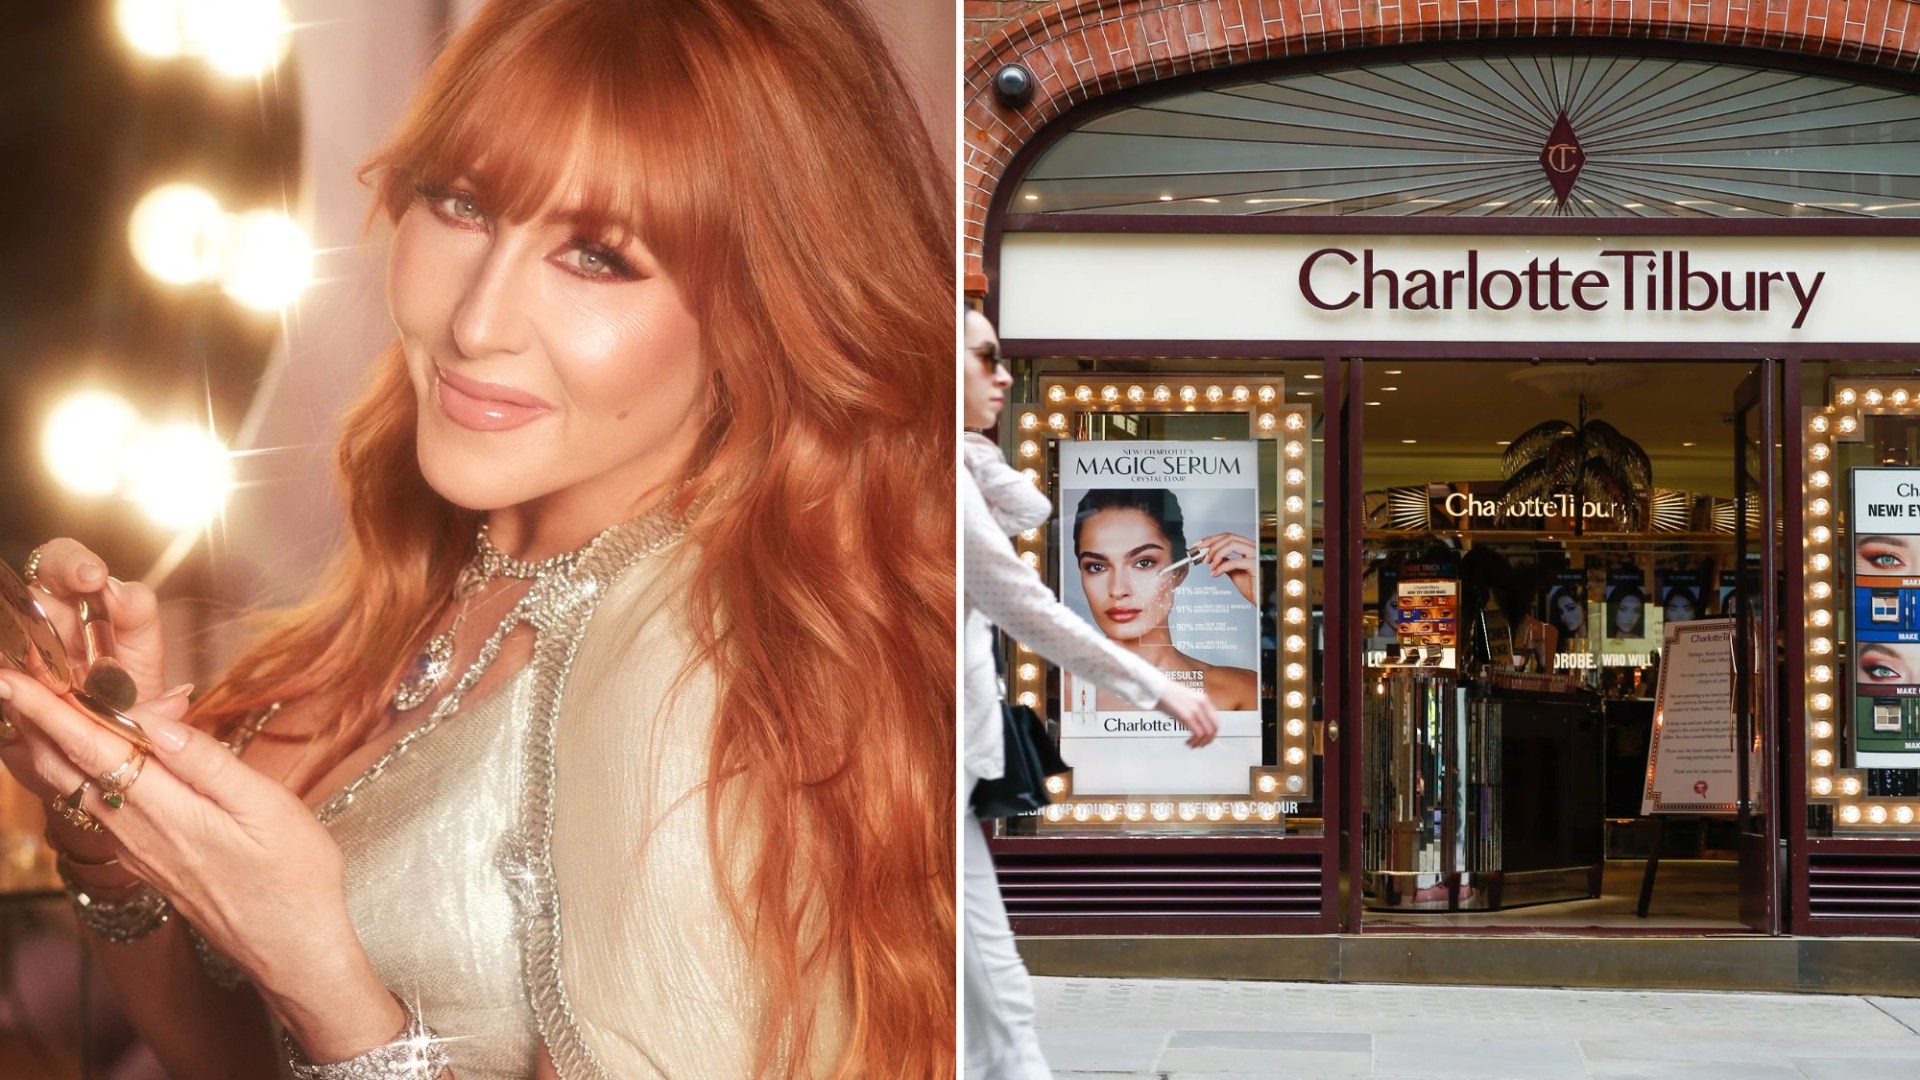 Charlotte Tilbury is giving away free mascaras to beauty fans – heres how to get your hands on the iconic product [Video]